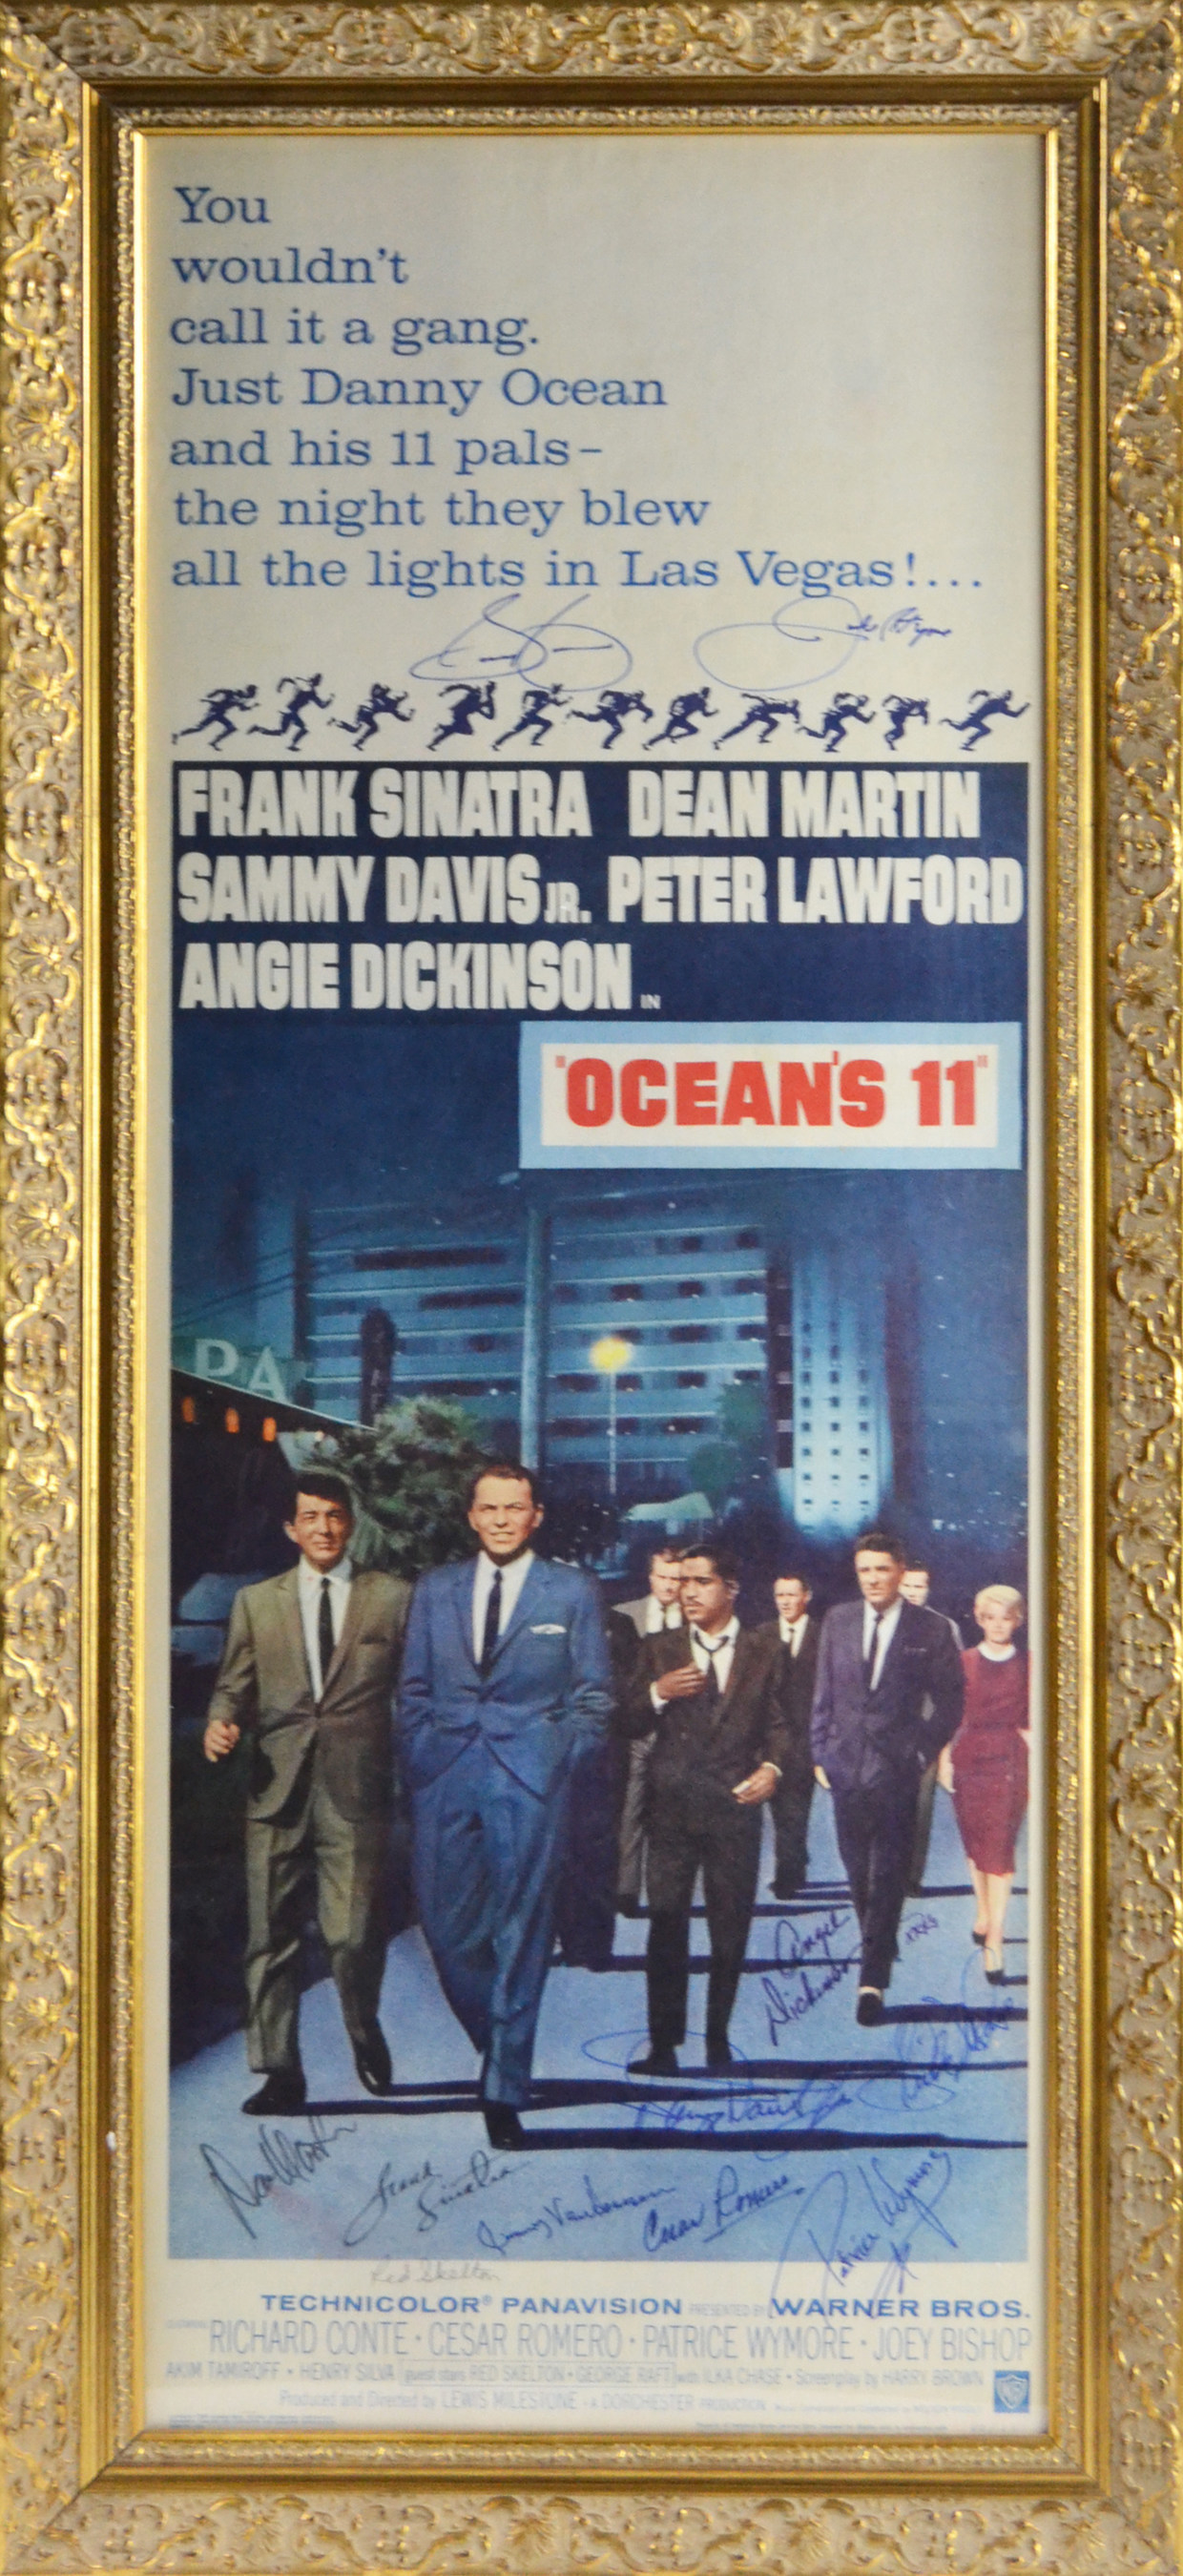 The timing of J. Levine Auction & Appraisal's April 30 auction has many collectors excited since this year marks what would have been Frank Sinatra's 100th birthday. This Ocean's 11 poster is part of a lifetime collection of more than 50 pieces of movie memorabilia that belonged to Artie Kern. It's signed by Rat packers Frank Sinatra, Peter Lawford, Dean Martin, Sammy Davis, Jr., Joey Bishop and other members of the cast. Kern was an audio-visual specialist who worked for songwriter Sammy Cahn, who was Frank Sinatra's personal lyricist for more than 50 years. www.jlevines.com